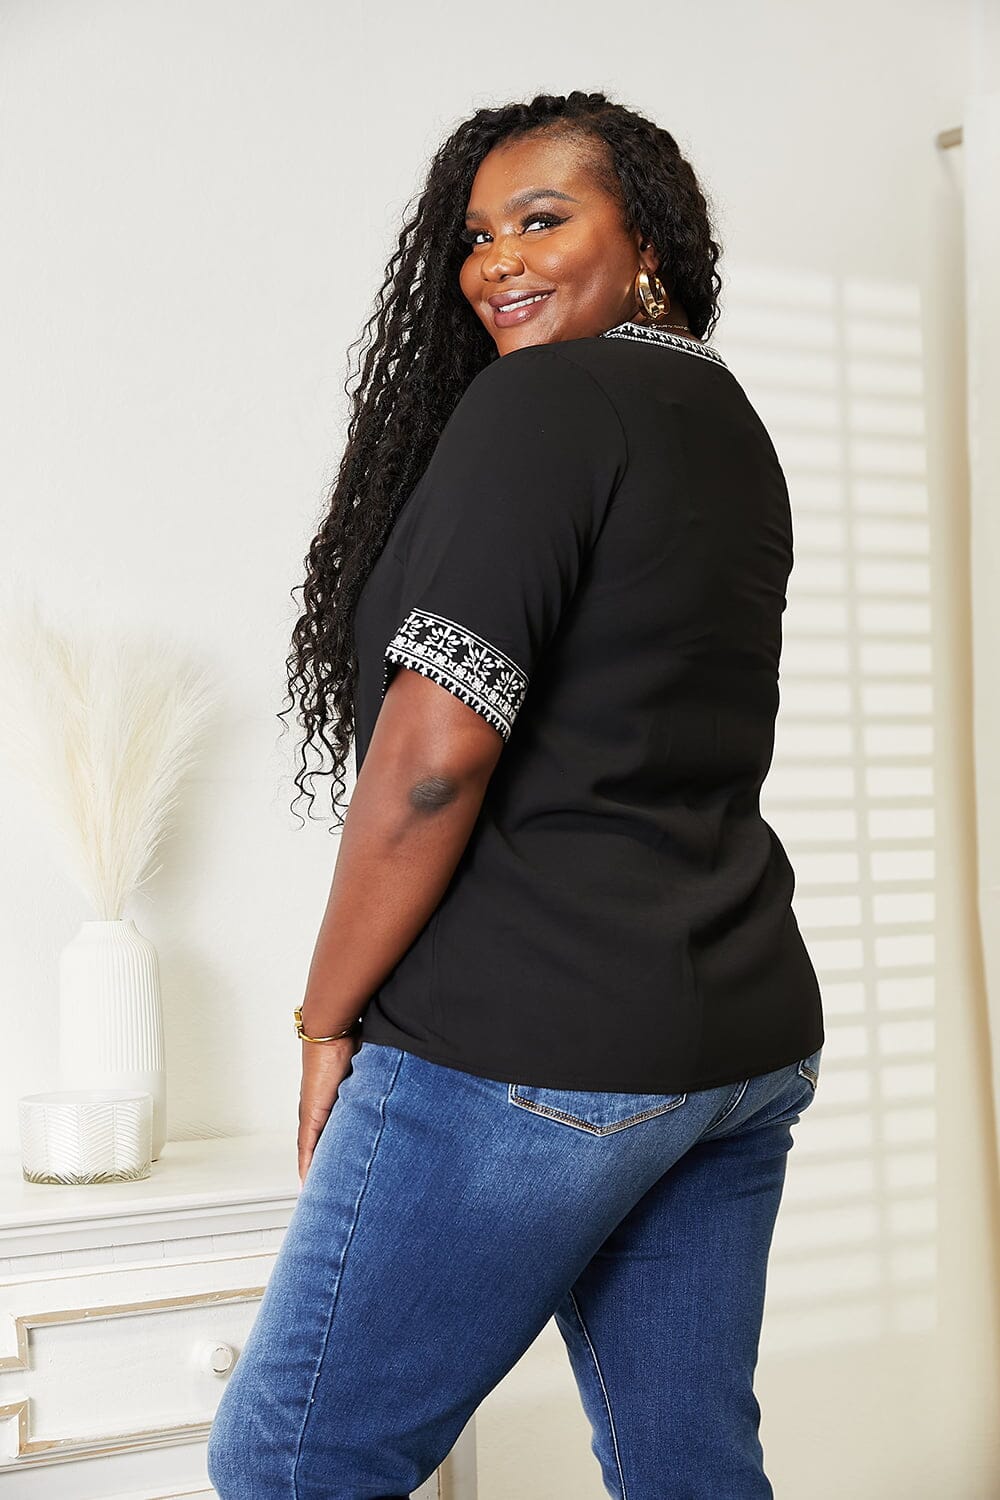 Double Take Black Embroidered Notched Neck Top Shirts & Tops jehouze 